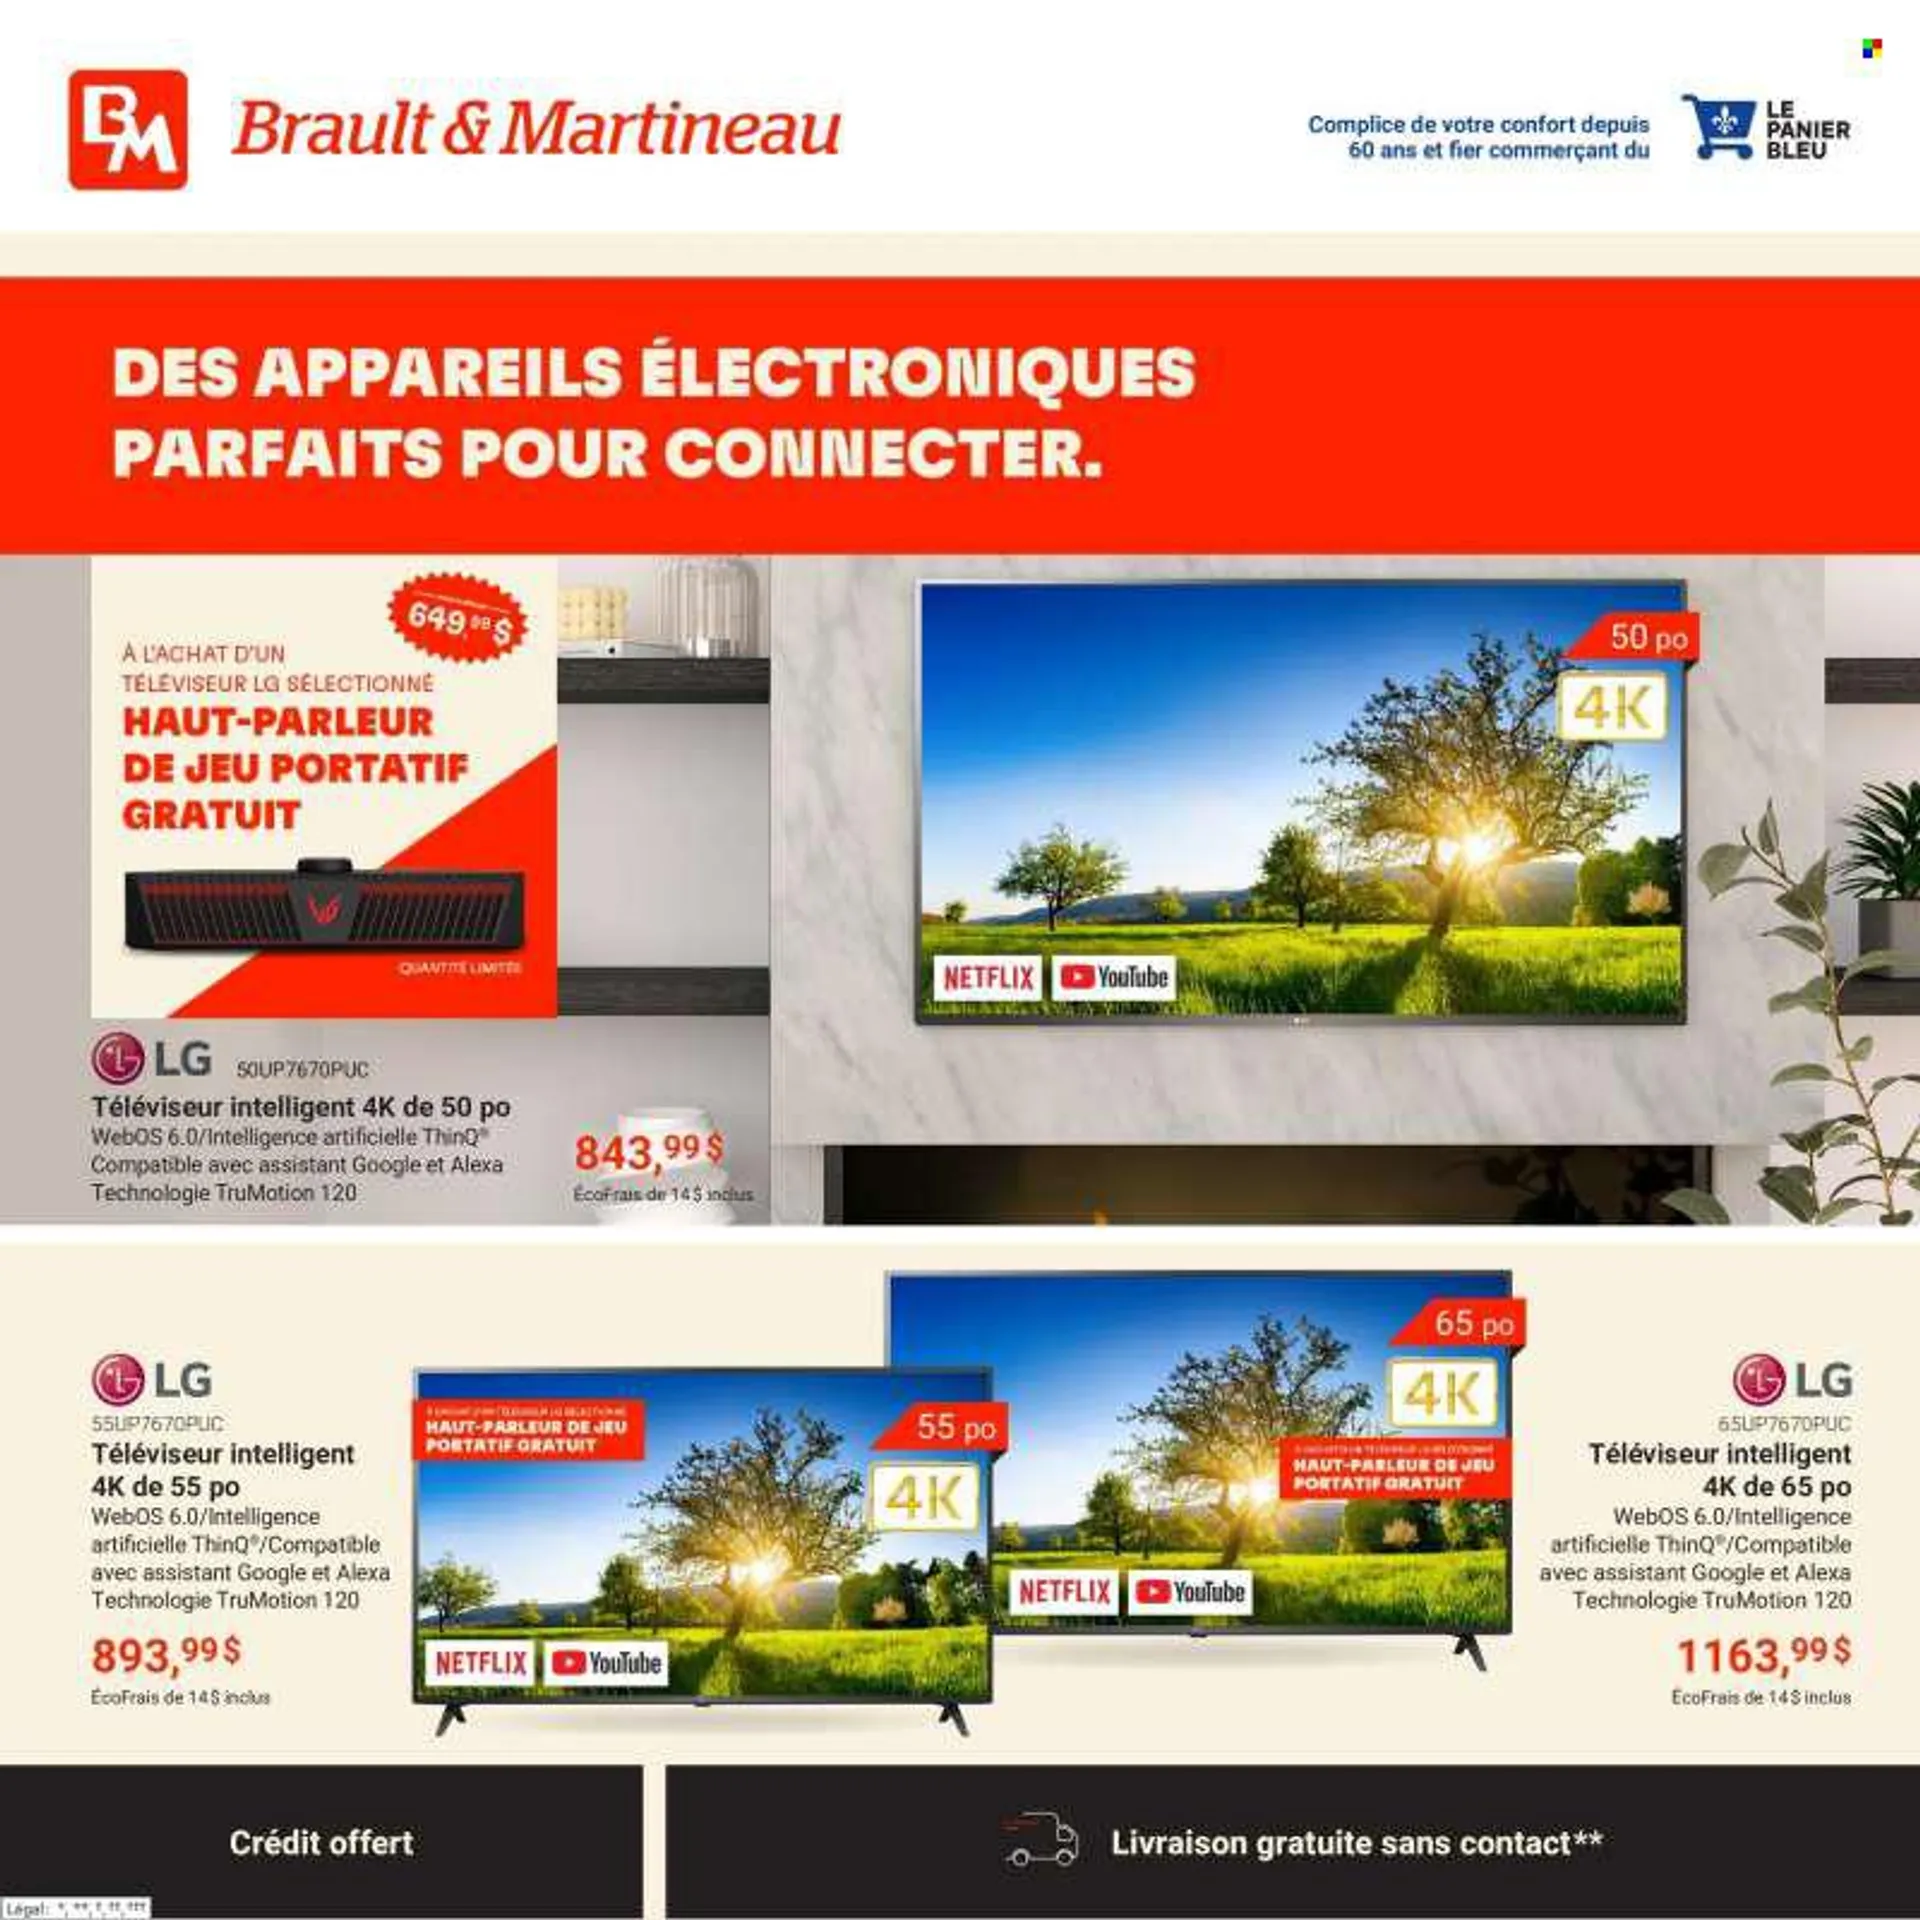 Brault & Martineau Flyer - May 24, 2022 - June 22, 2022. from May 24 to June 22 2022 - flyer page 1